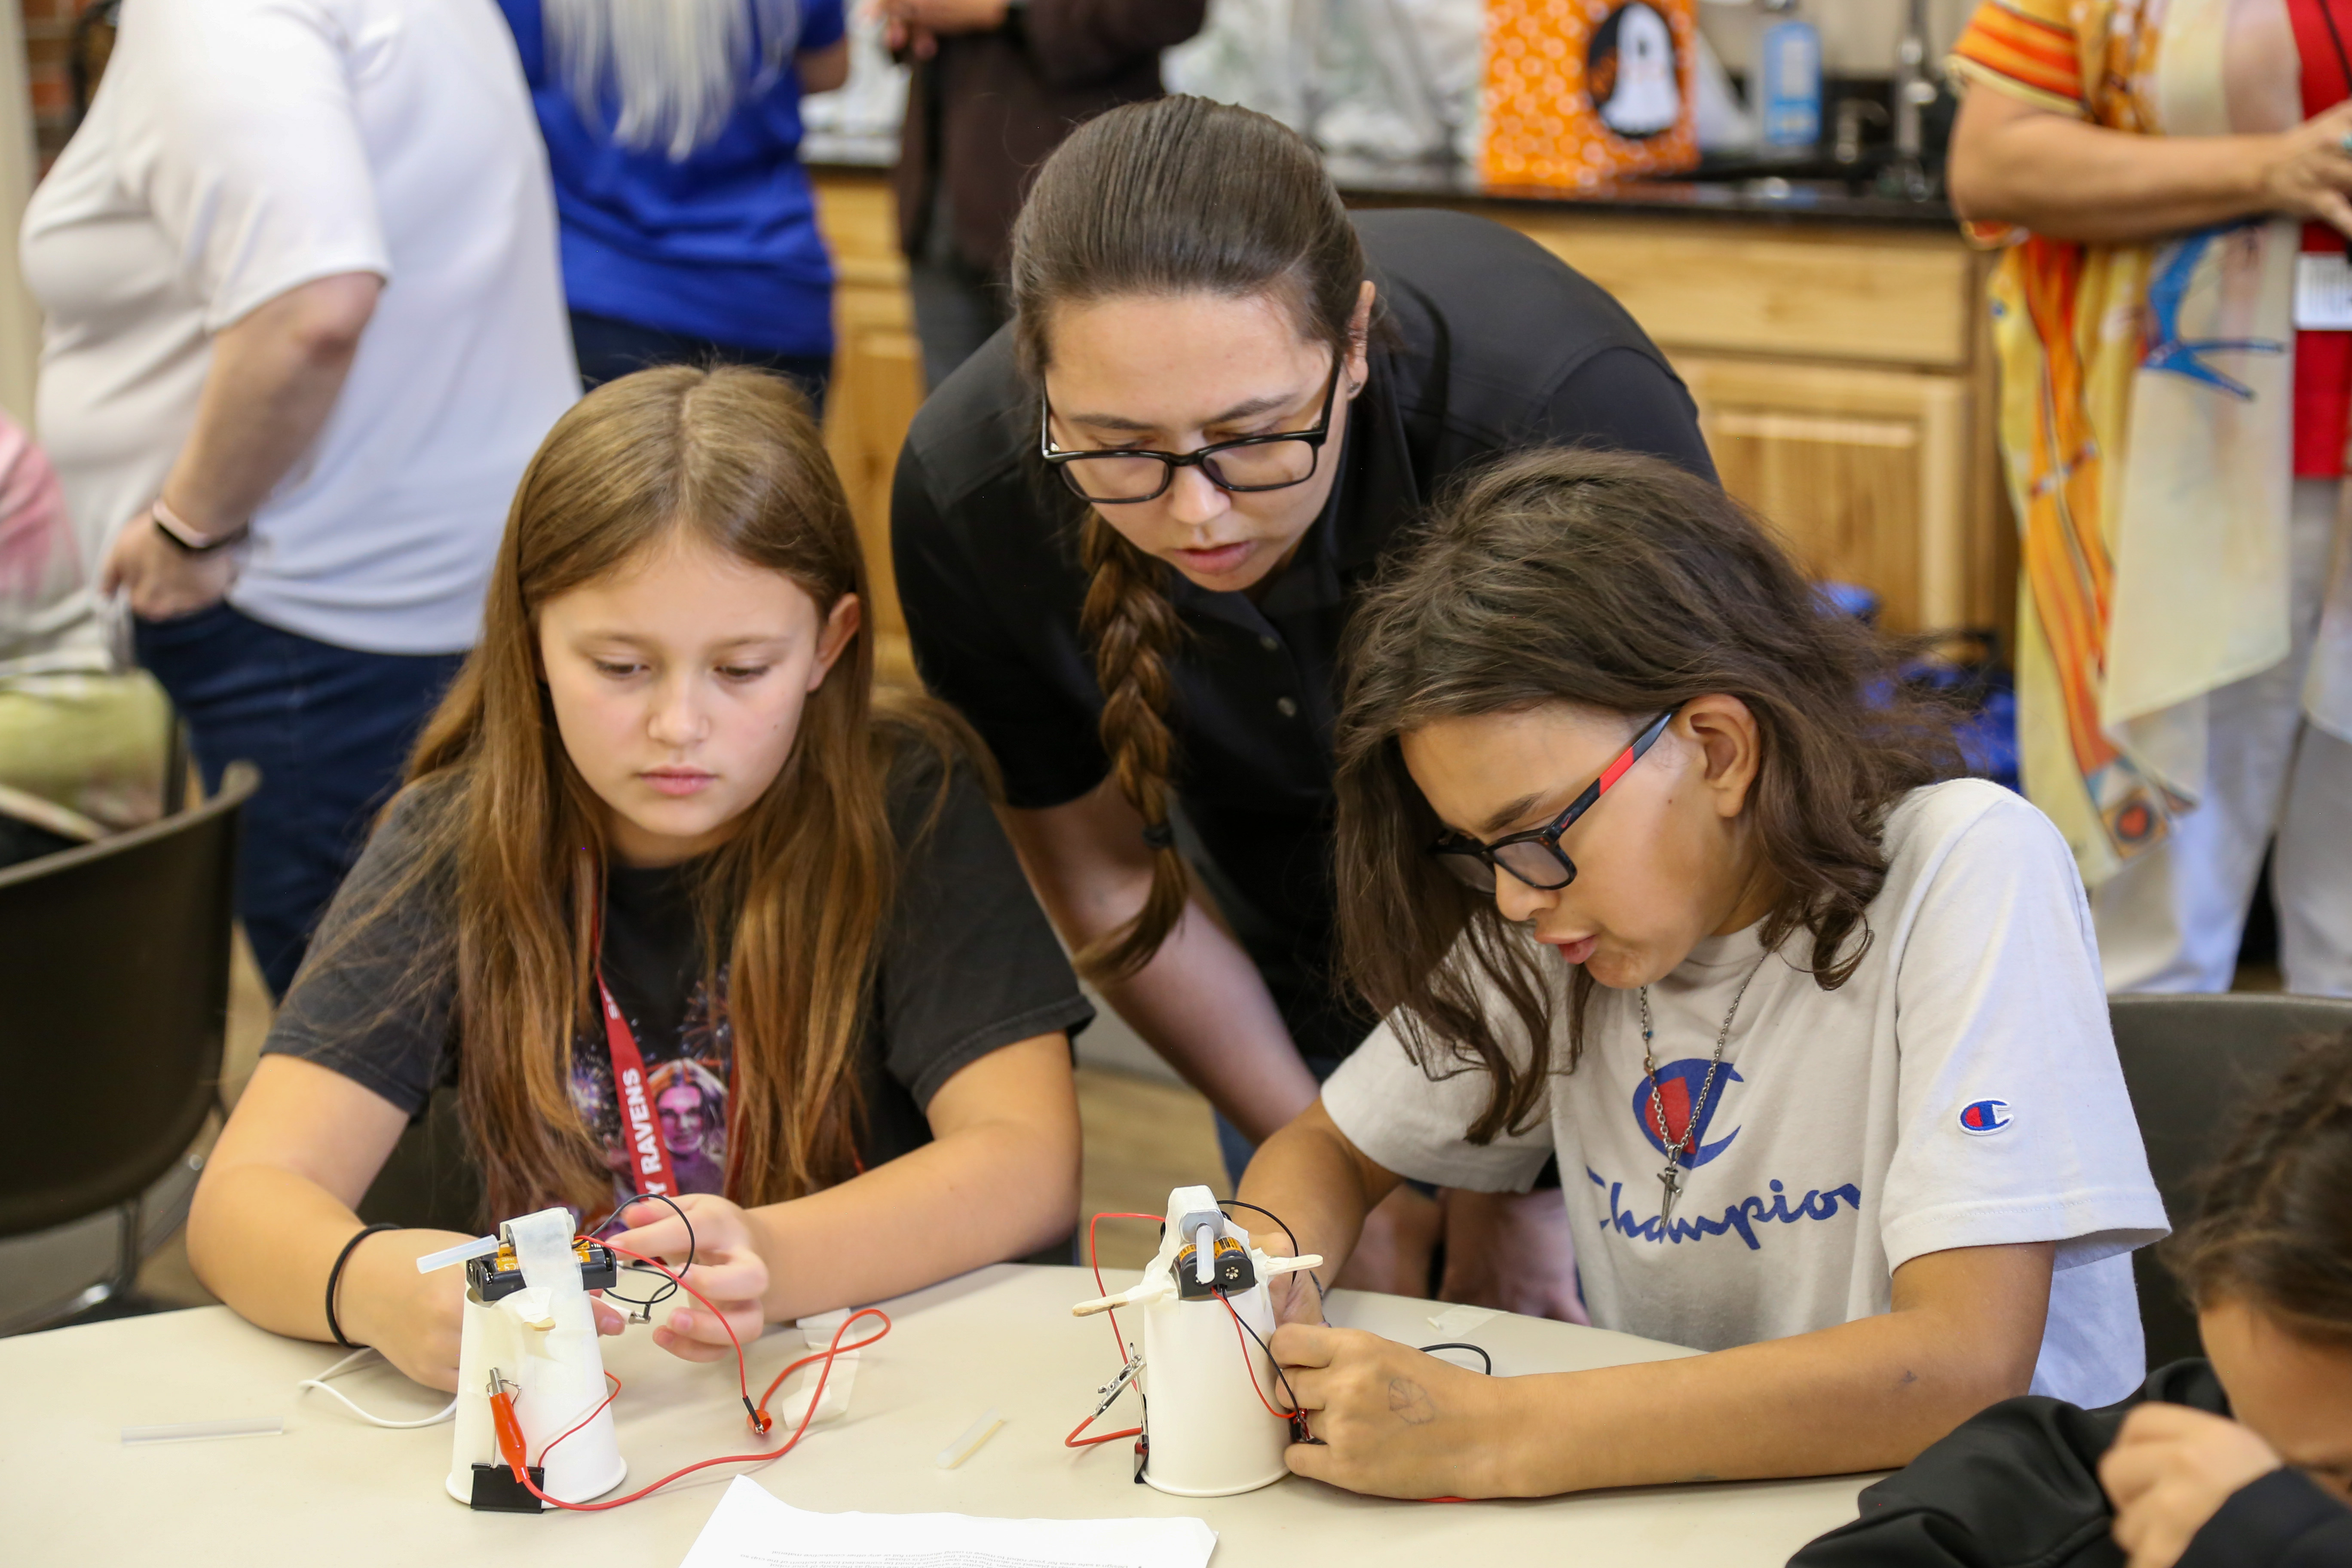 Casey Denham, a Meskwaki woman, leans over to help two tribal students with a STEM project. The children sit at a white round table. Each of them holds wires in their hands. The black and red wires are connected to paper cups.